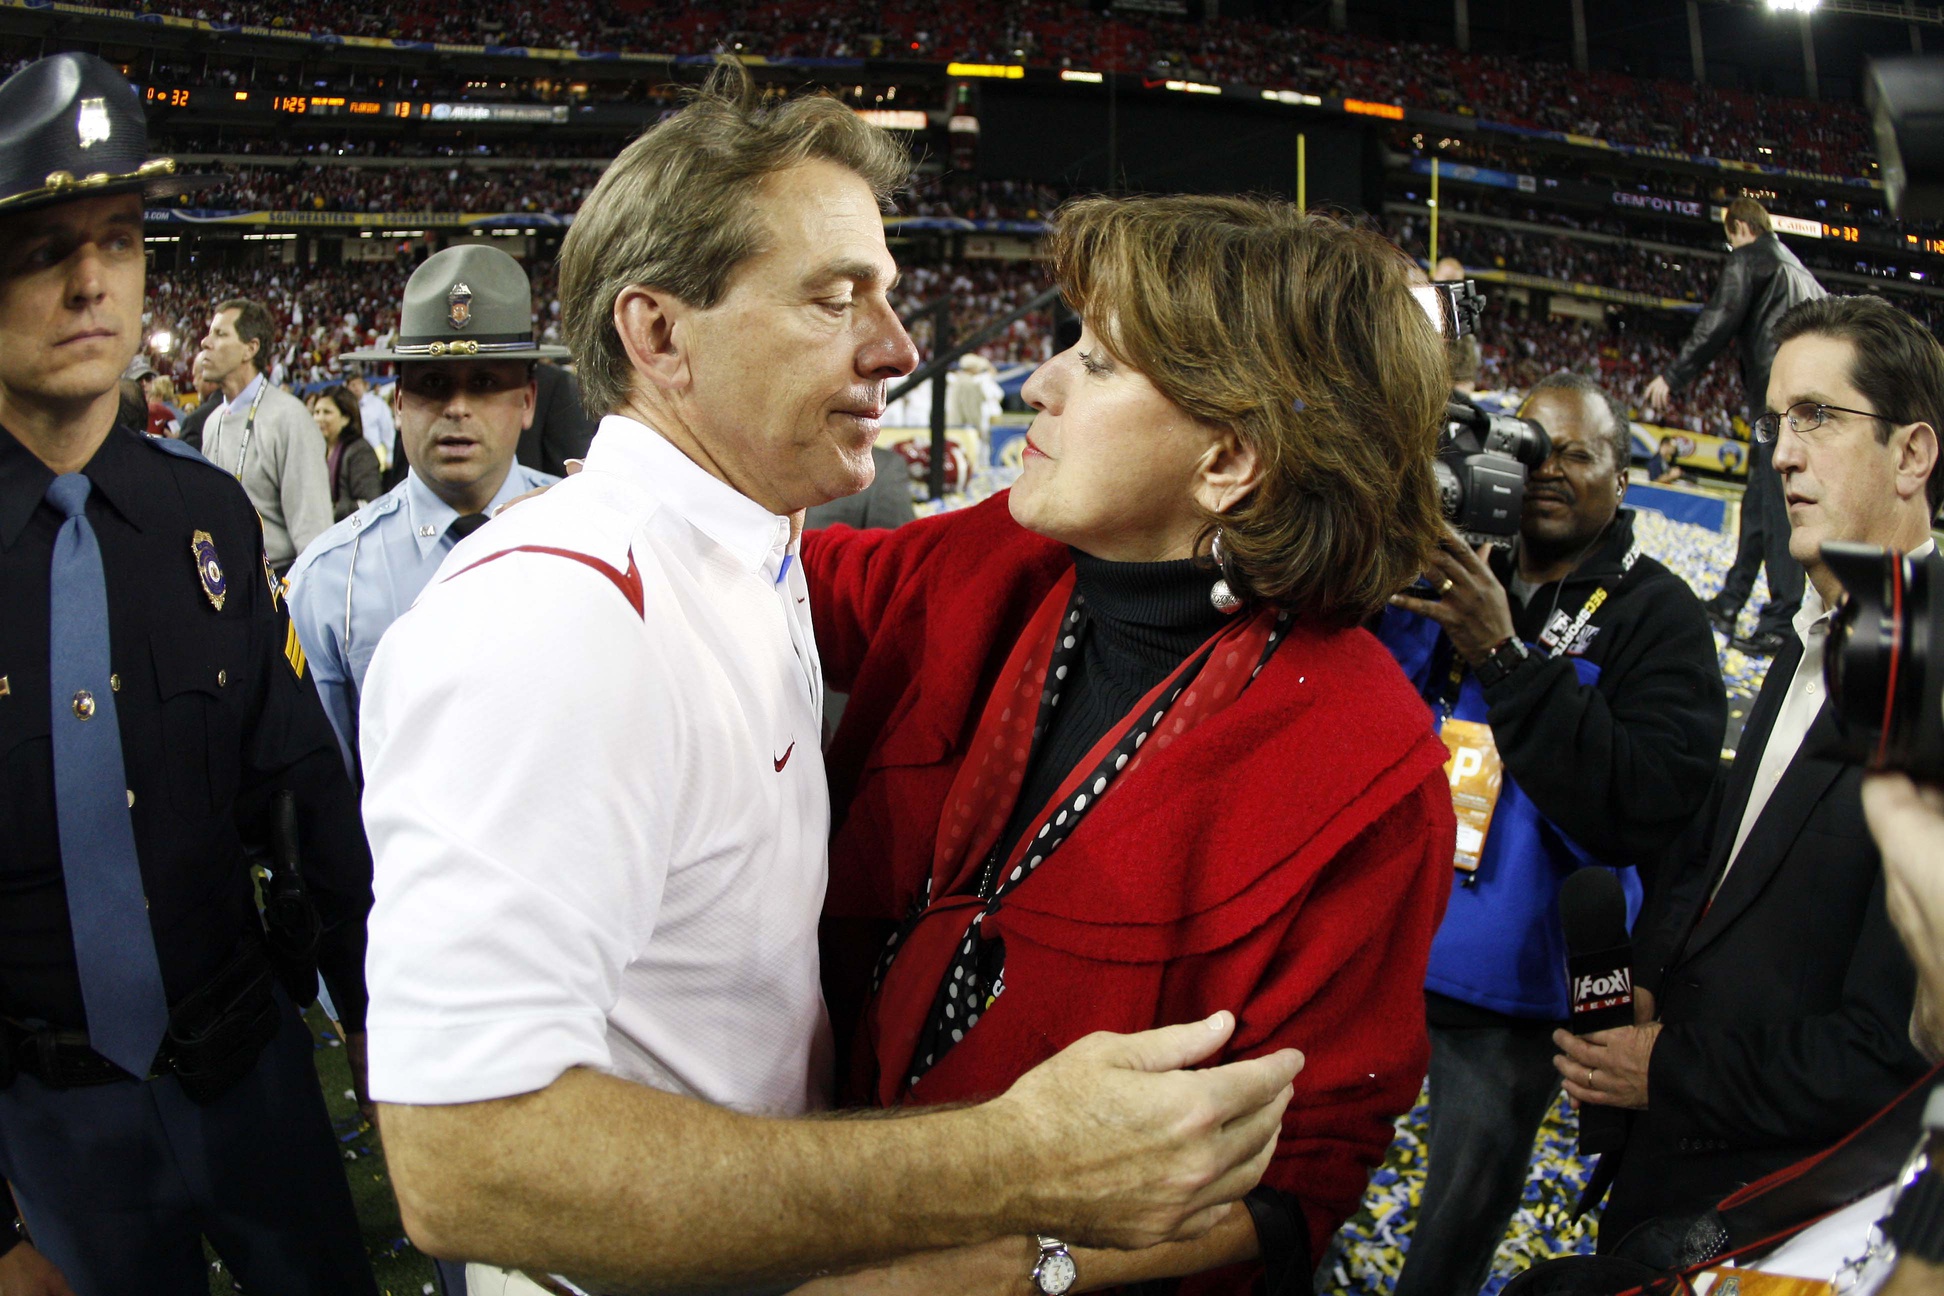 Nick Saban doesn’t want to take this suggestion from wife, Terry